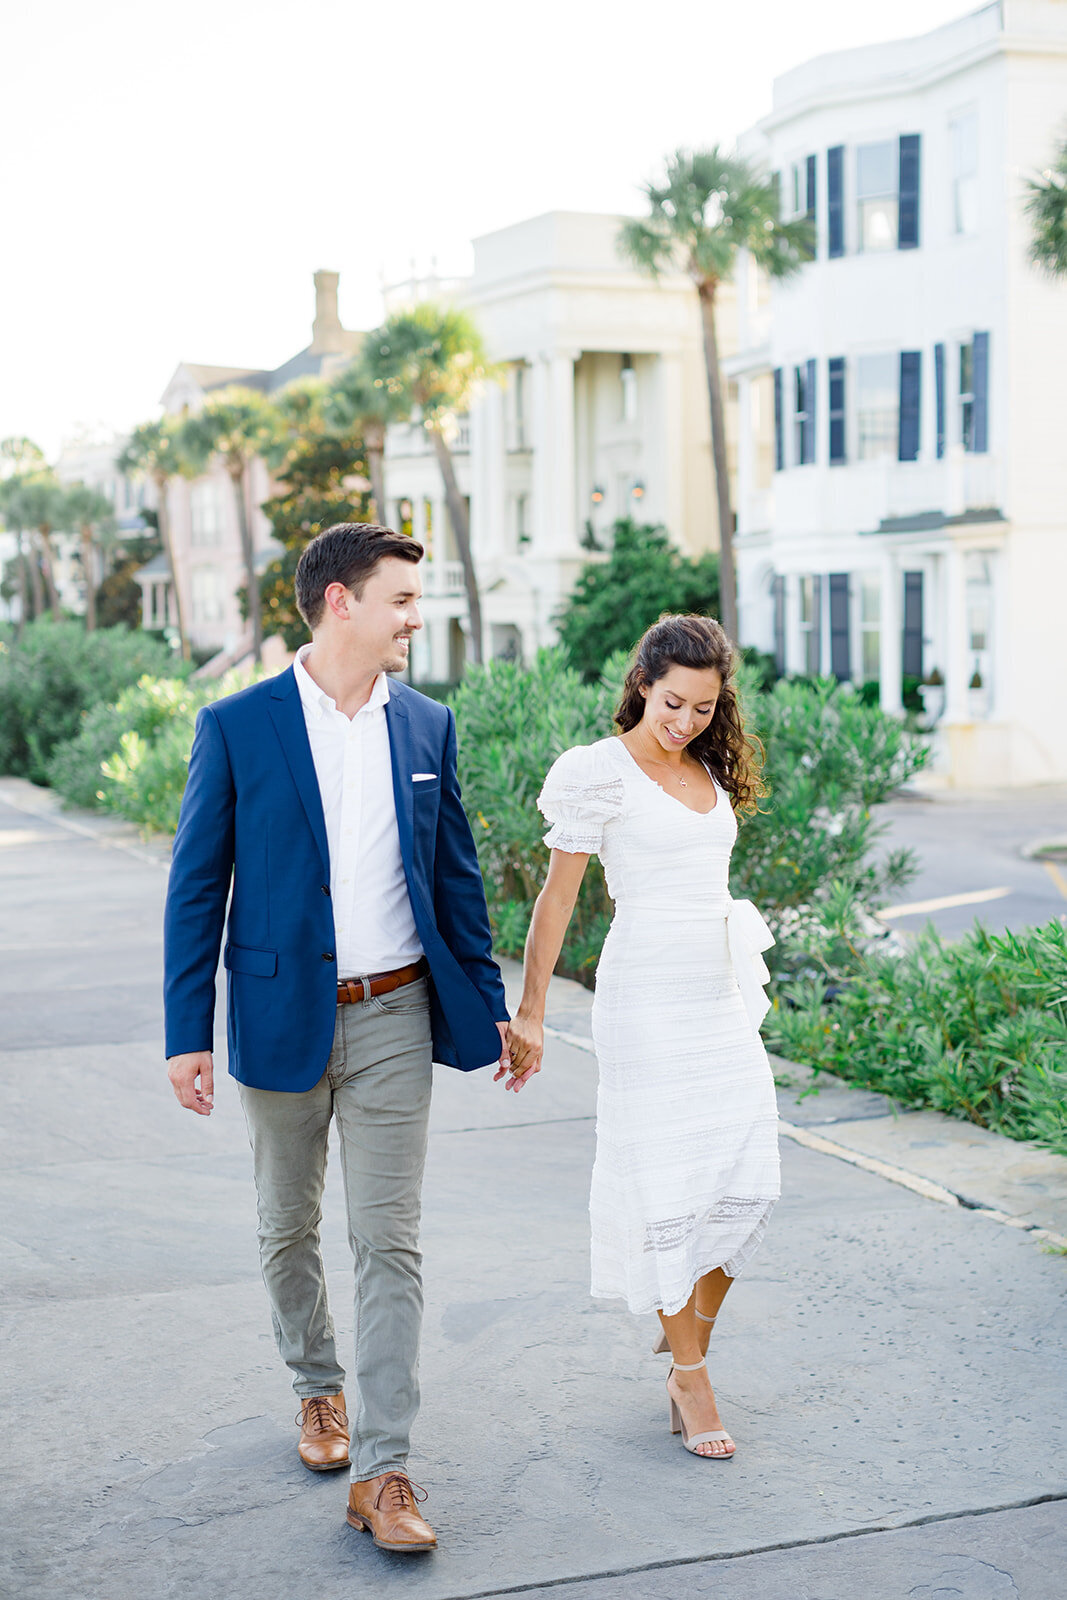 walking_on_the_battery_palm_trees_downtown_charleston_destination_wedding_photographer_engagement_kailee_dimeglio_photography-79_websize